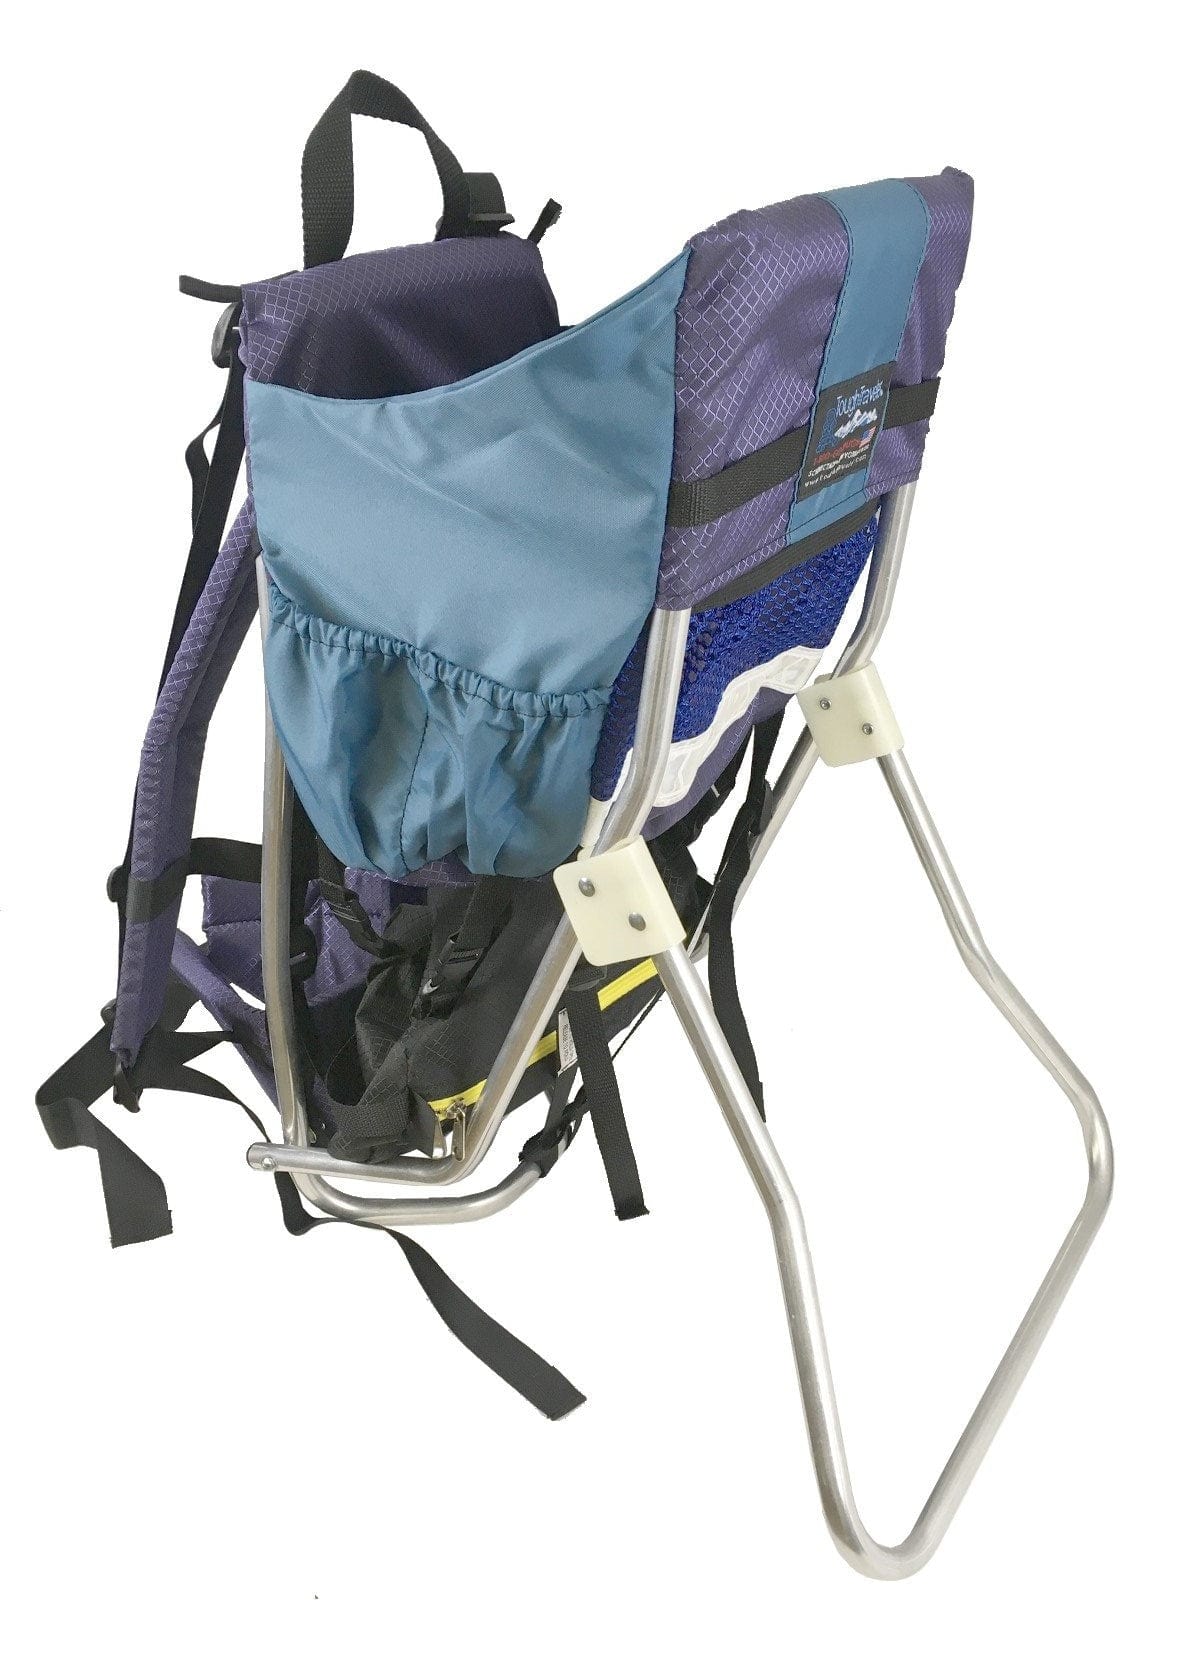 STALLION DOG PERCH BACKPACK (Up to 30 lbs), Made in USA